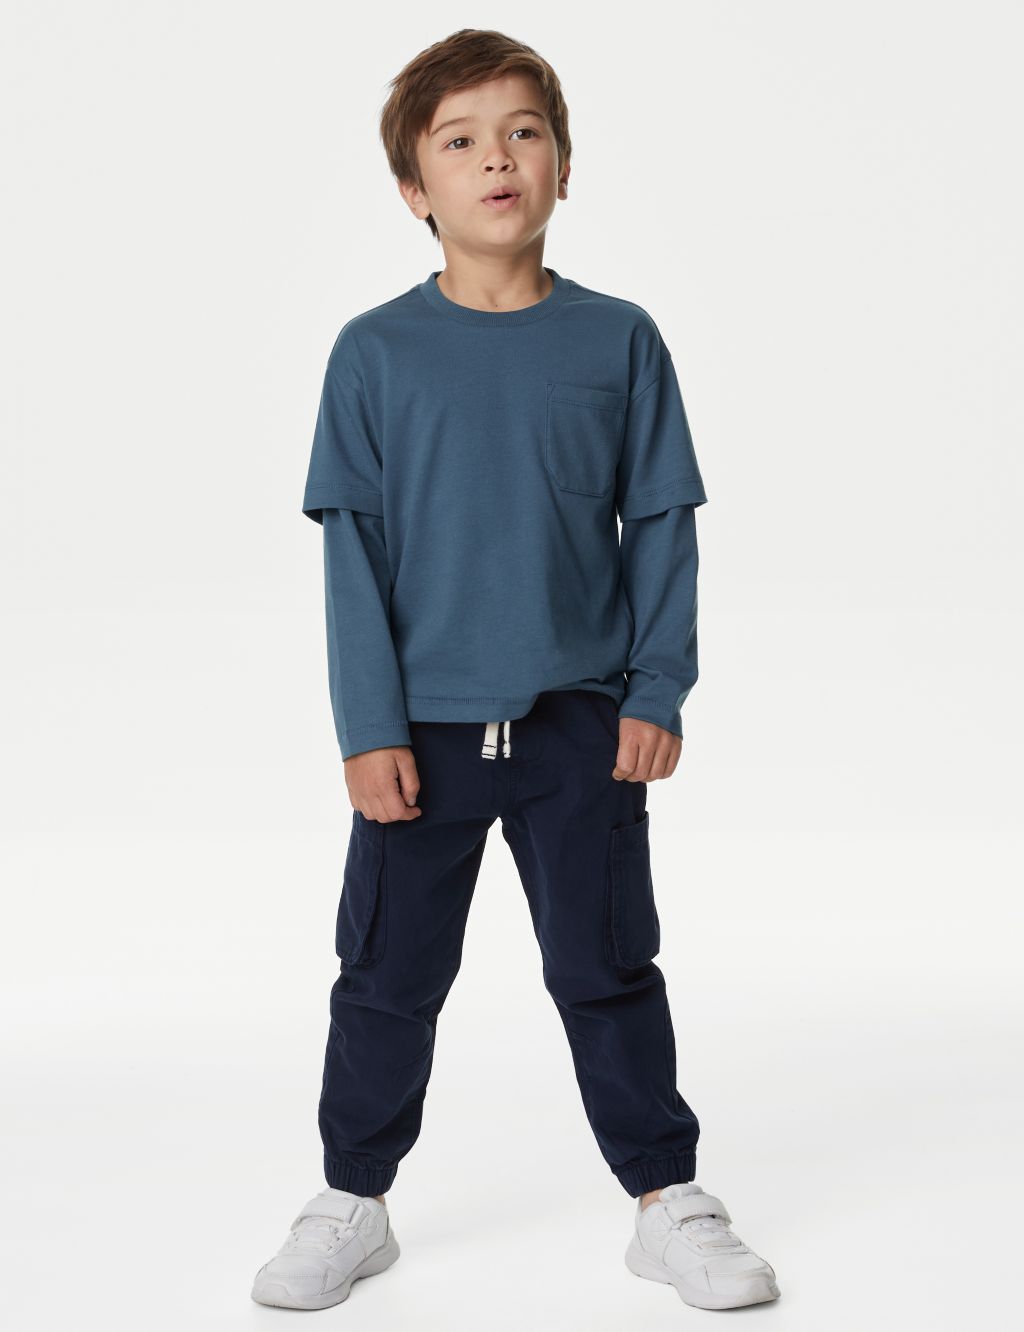 Page 6 - Boys' Clothes | M&S